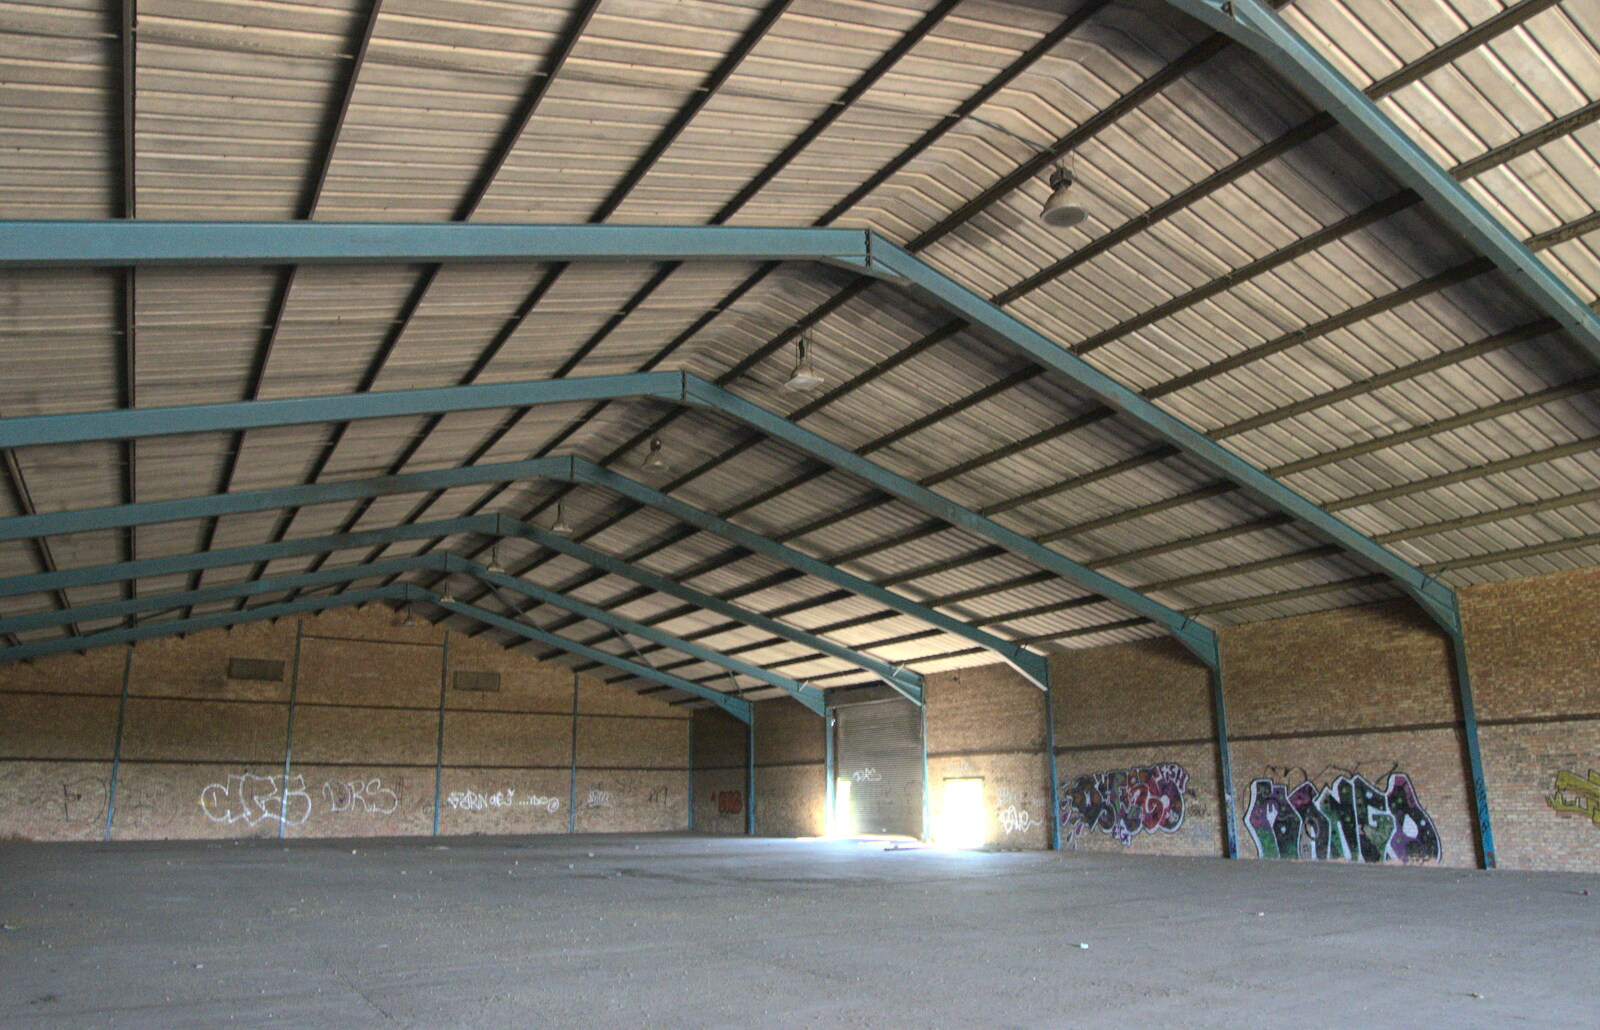 Another view of the huge spookily-empty warehouse from Rural Norfolk Dereliction and Graffiti, Ipswich Road, Norwich - 27th May 2012